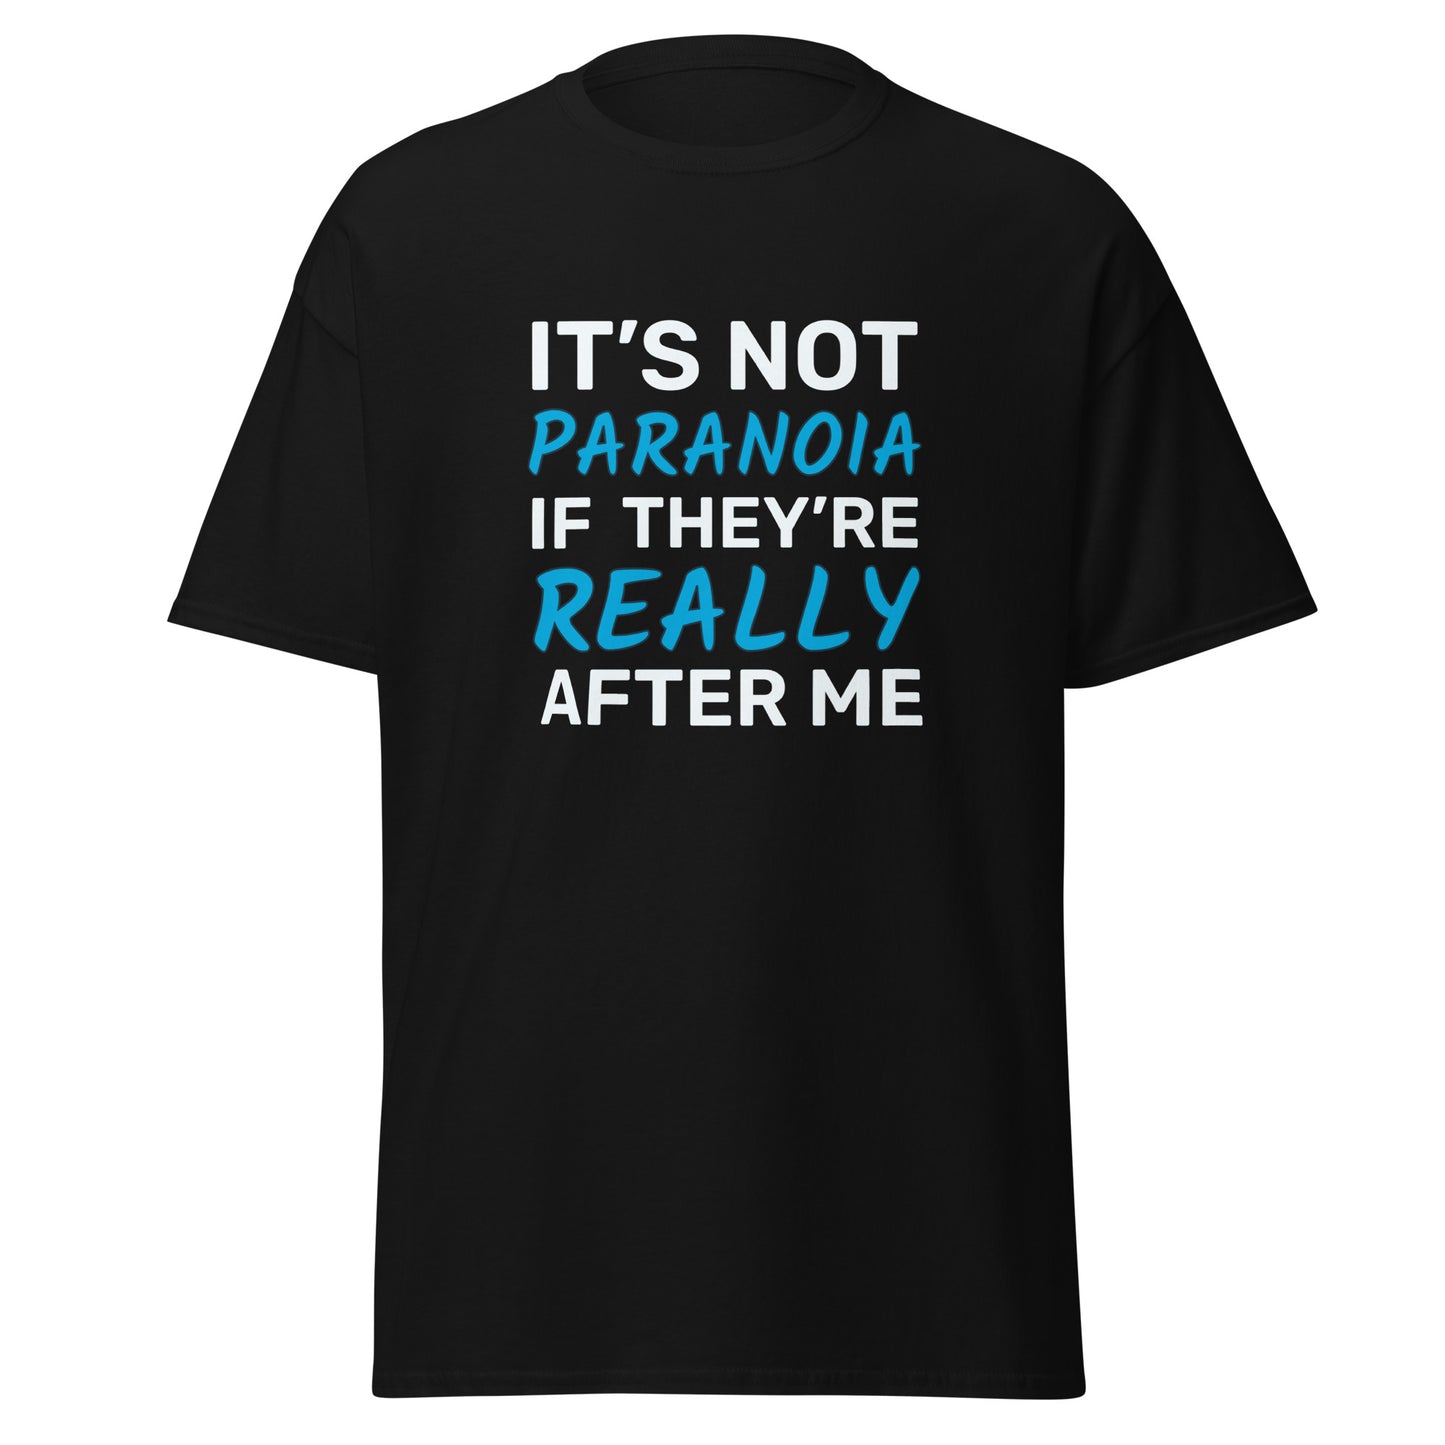 It's Not Paranoia If They're Really After Me - Men's Classic Tee